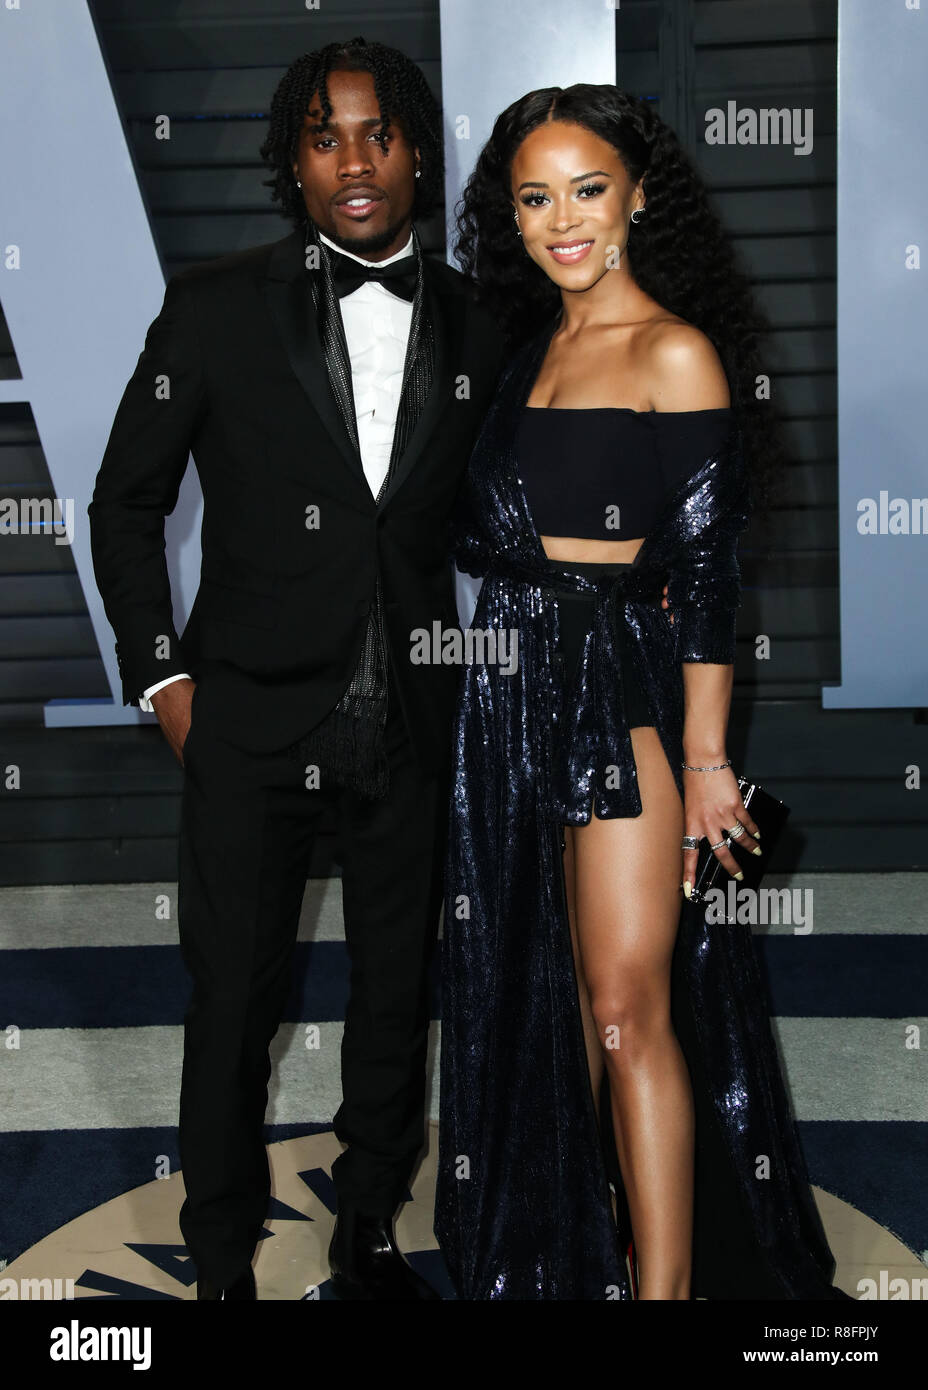 BEVERLY HILLS, LOS ANGELES, CA, USA - MARCH 04: Shameik Moore, Serayah McNeill at the 2018 Vanity Fair Oscar Party held at the Wallis Annenberg Center for the Performing Arts on March 4, 2018 in Beverly Hills, Los Angeles, California, United States. (Photo by Xavier Collin/Image Press Agency) Stock Photo